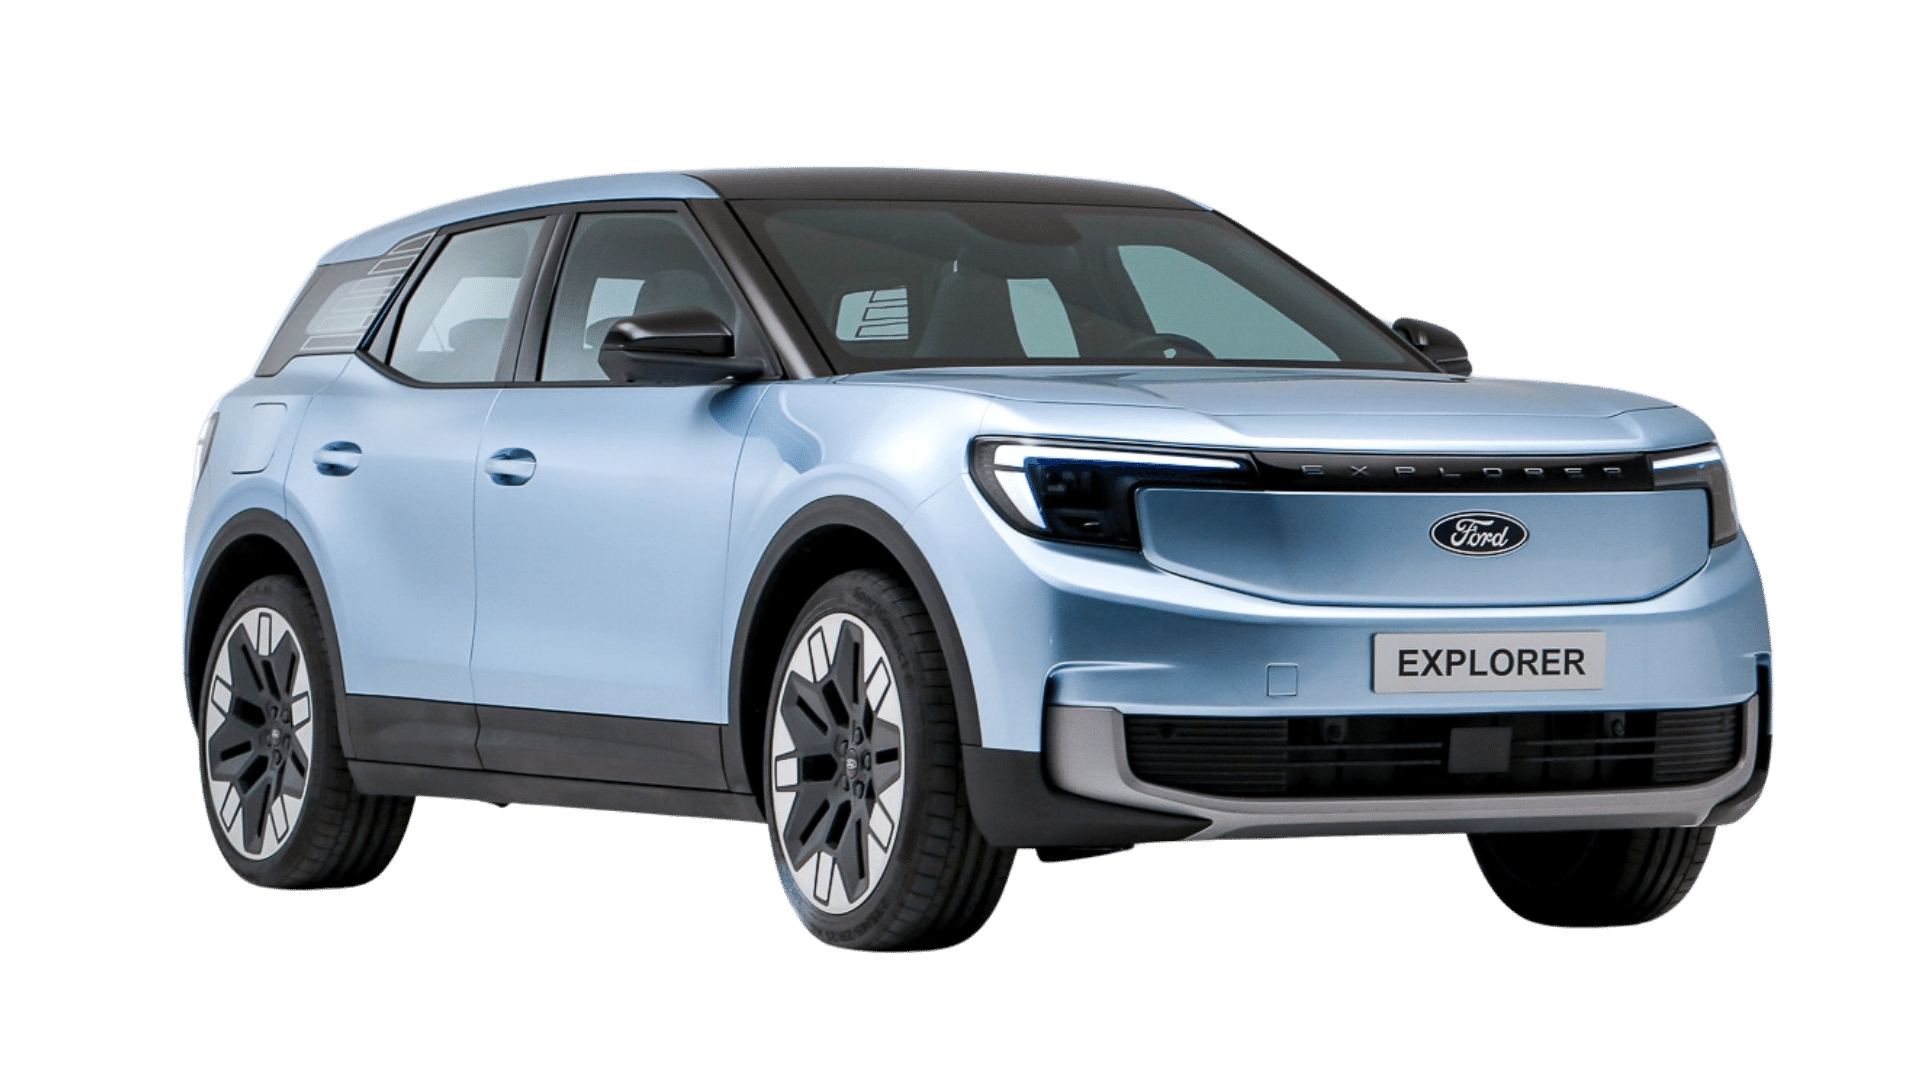 Charging your Ford Explorer electric